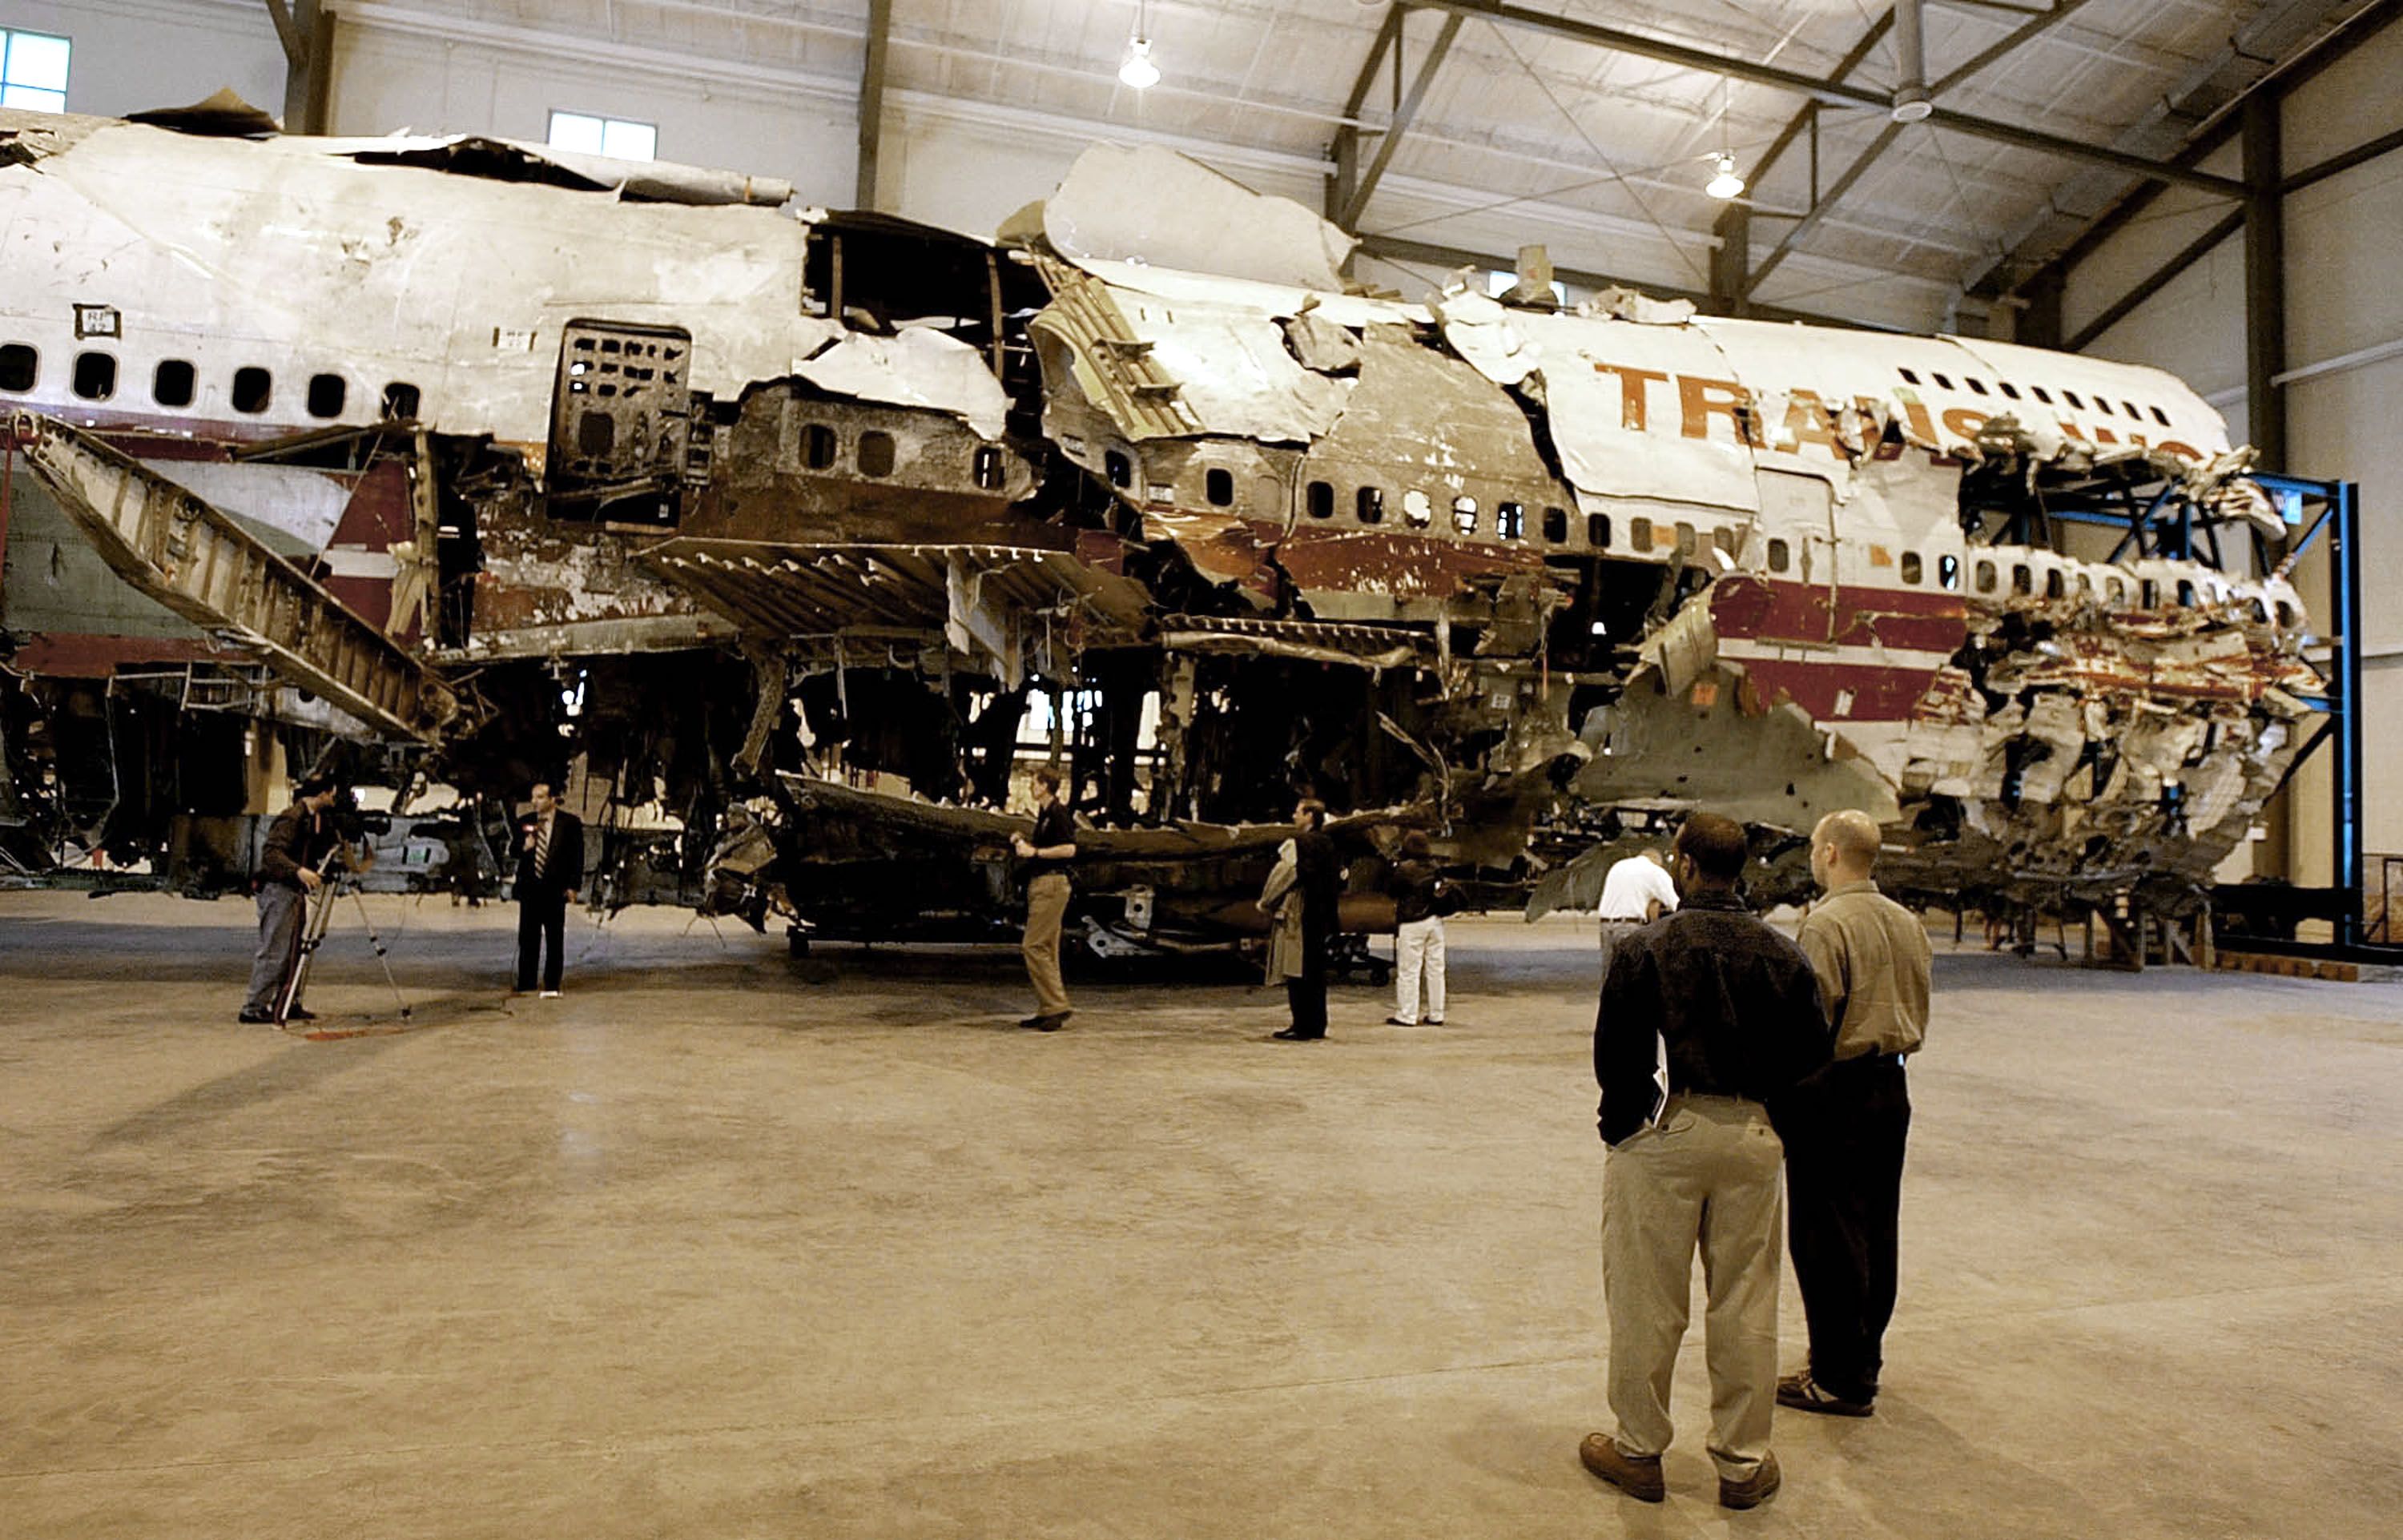 7 ways air travel changed after air disasters